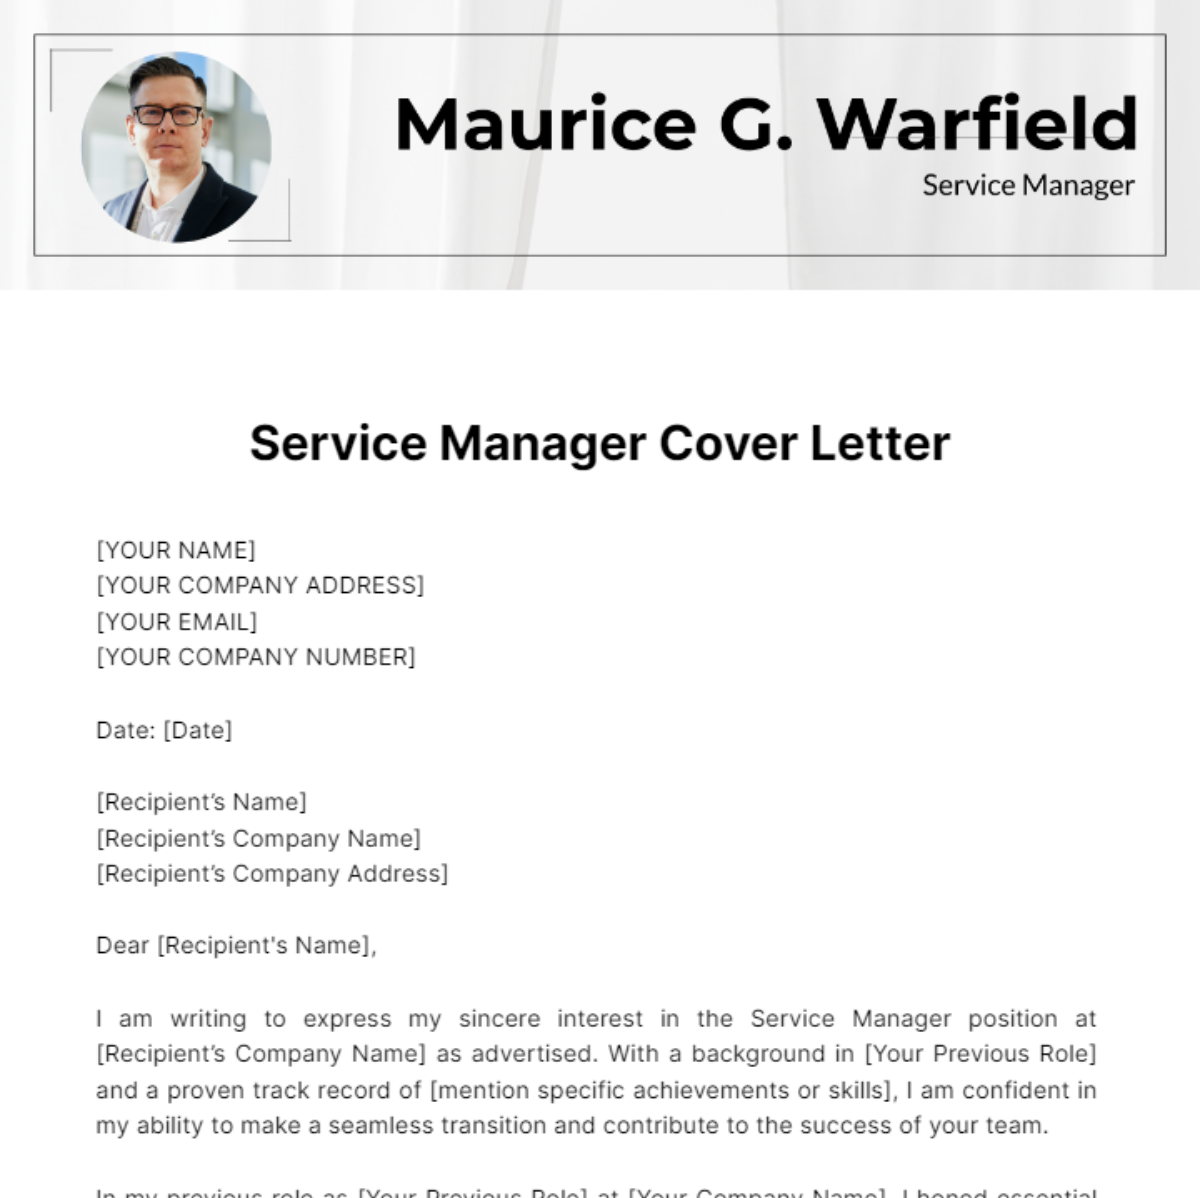 Service Manager Cover Letter Template